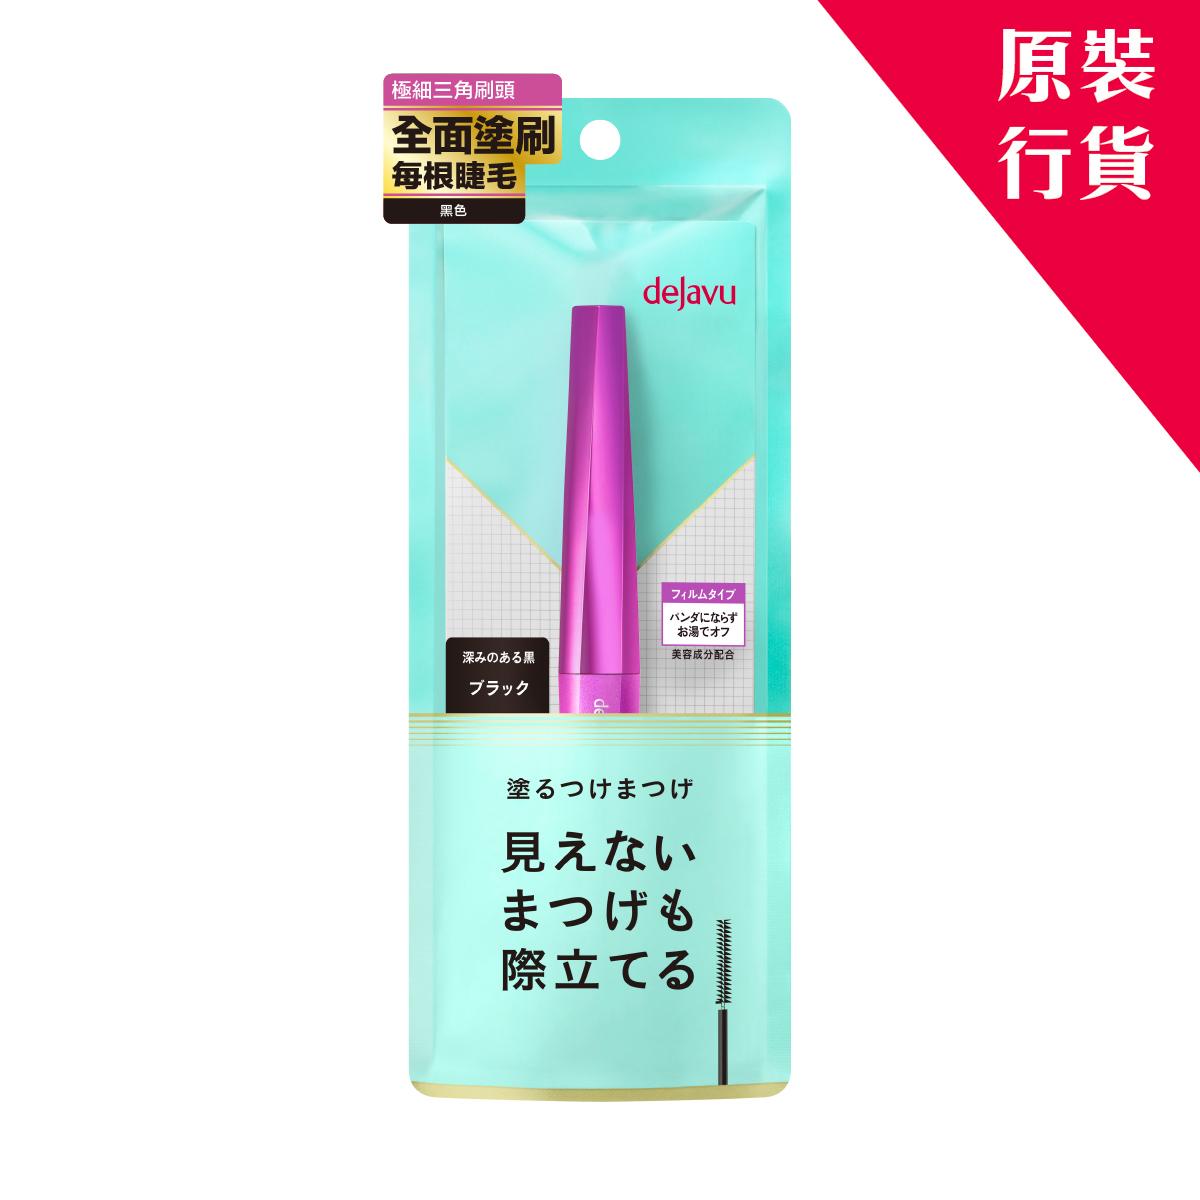 [Authorized Goods] Made in Japan- Lash Up Mascara, Black (New Packaging)